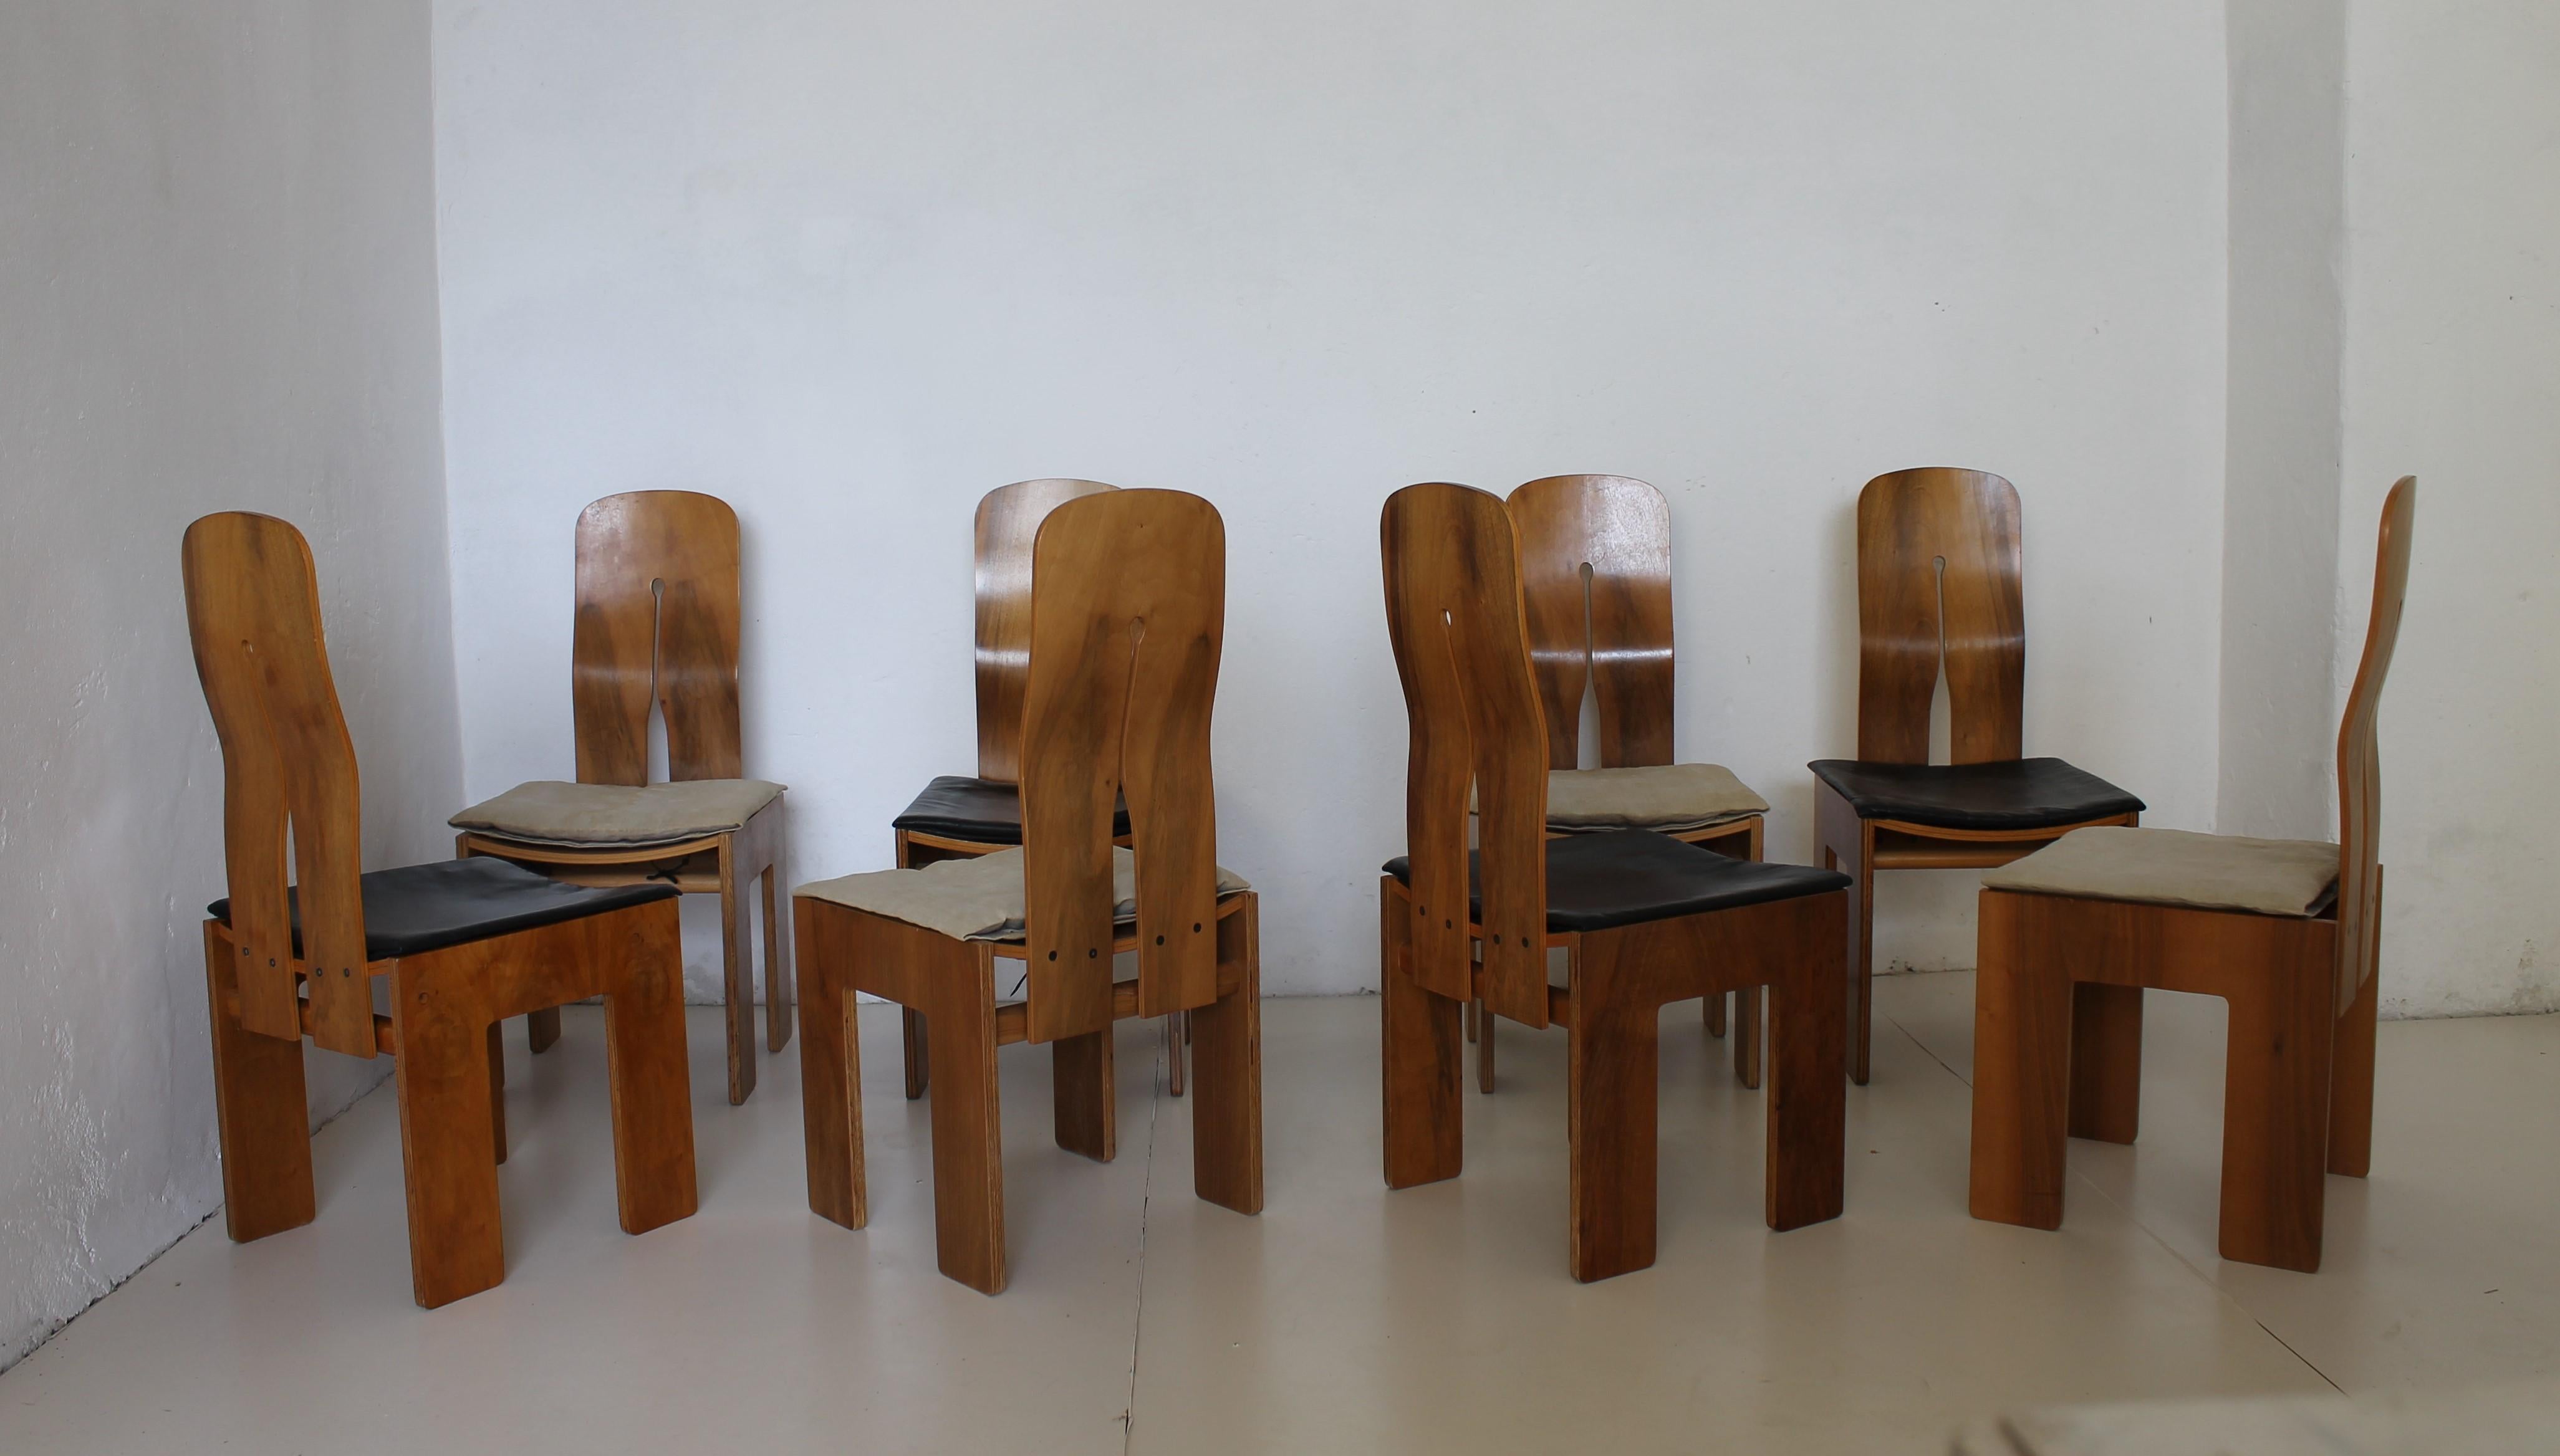 Eight Carlo Scarpa walnut chairs, black leather and canvas cushions mod. 1934 / 765 for Bernini 1977.


765 is planned by Carlo Scarpa in 1934, year from which the chair will take subsequently the name, but it will be produced only in the 1977.

The